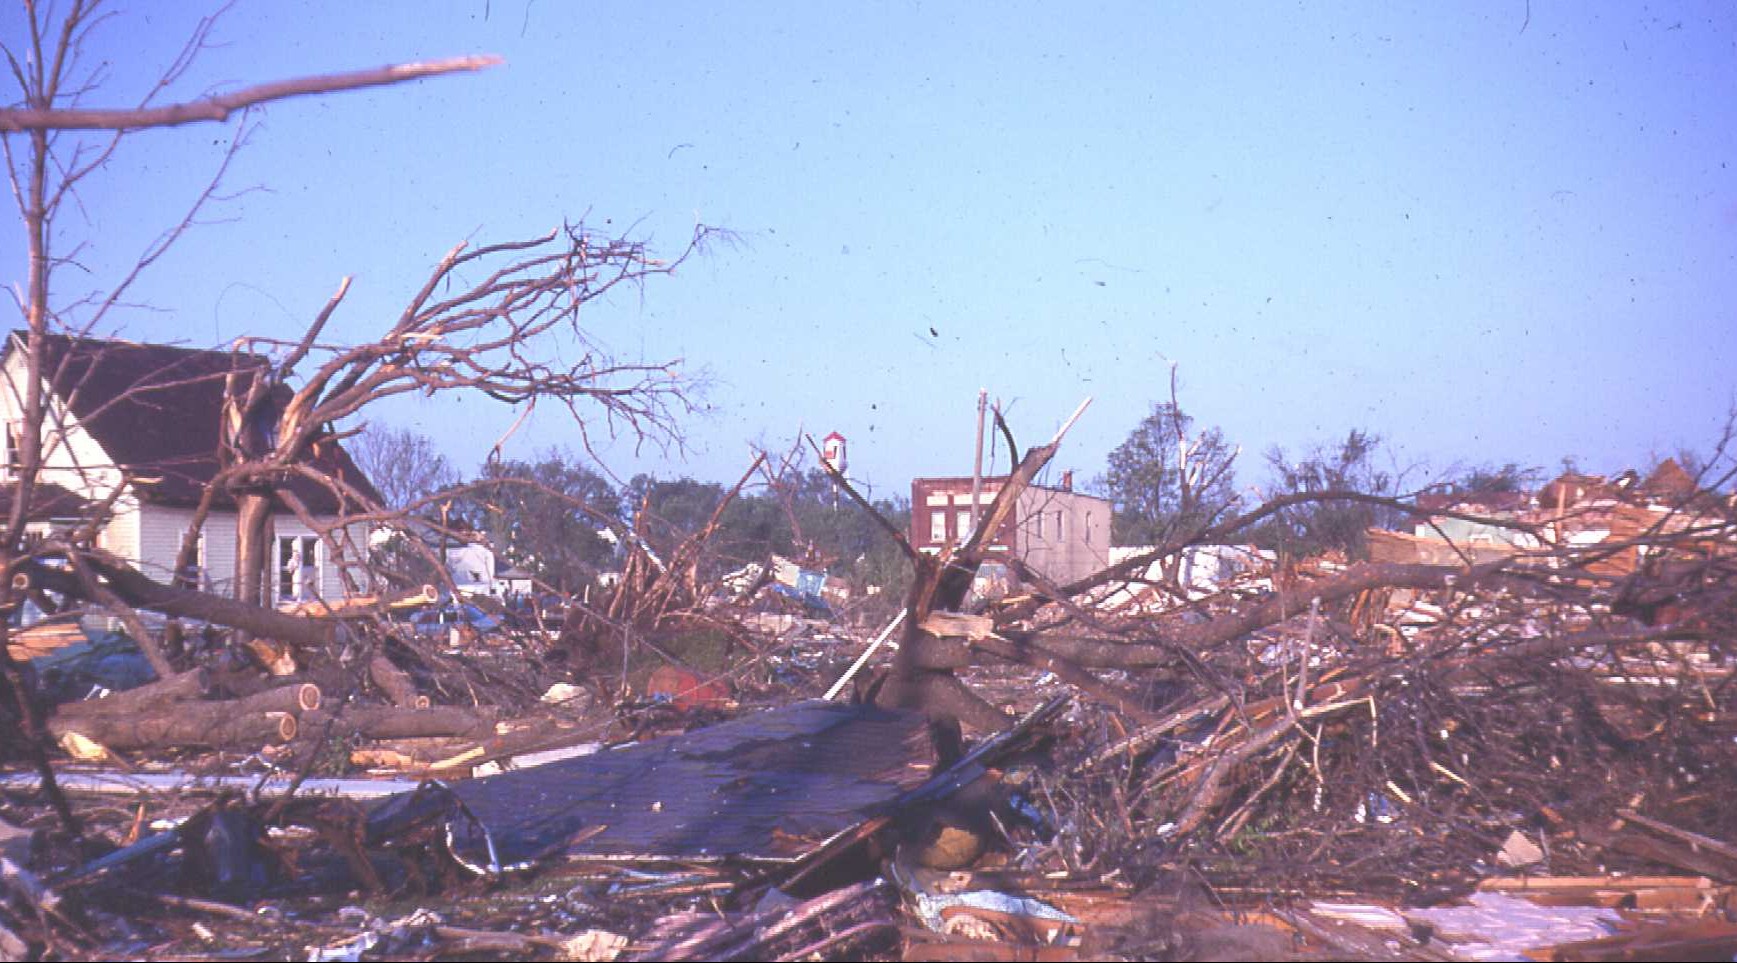 Events planned to commemorate the 1968 tornado